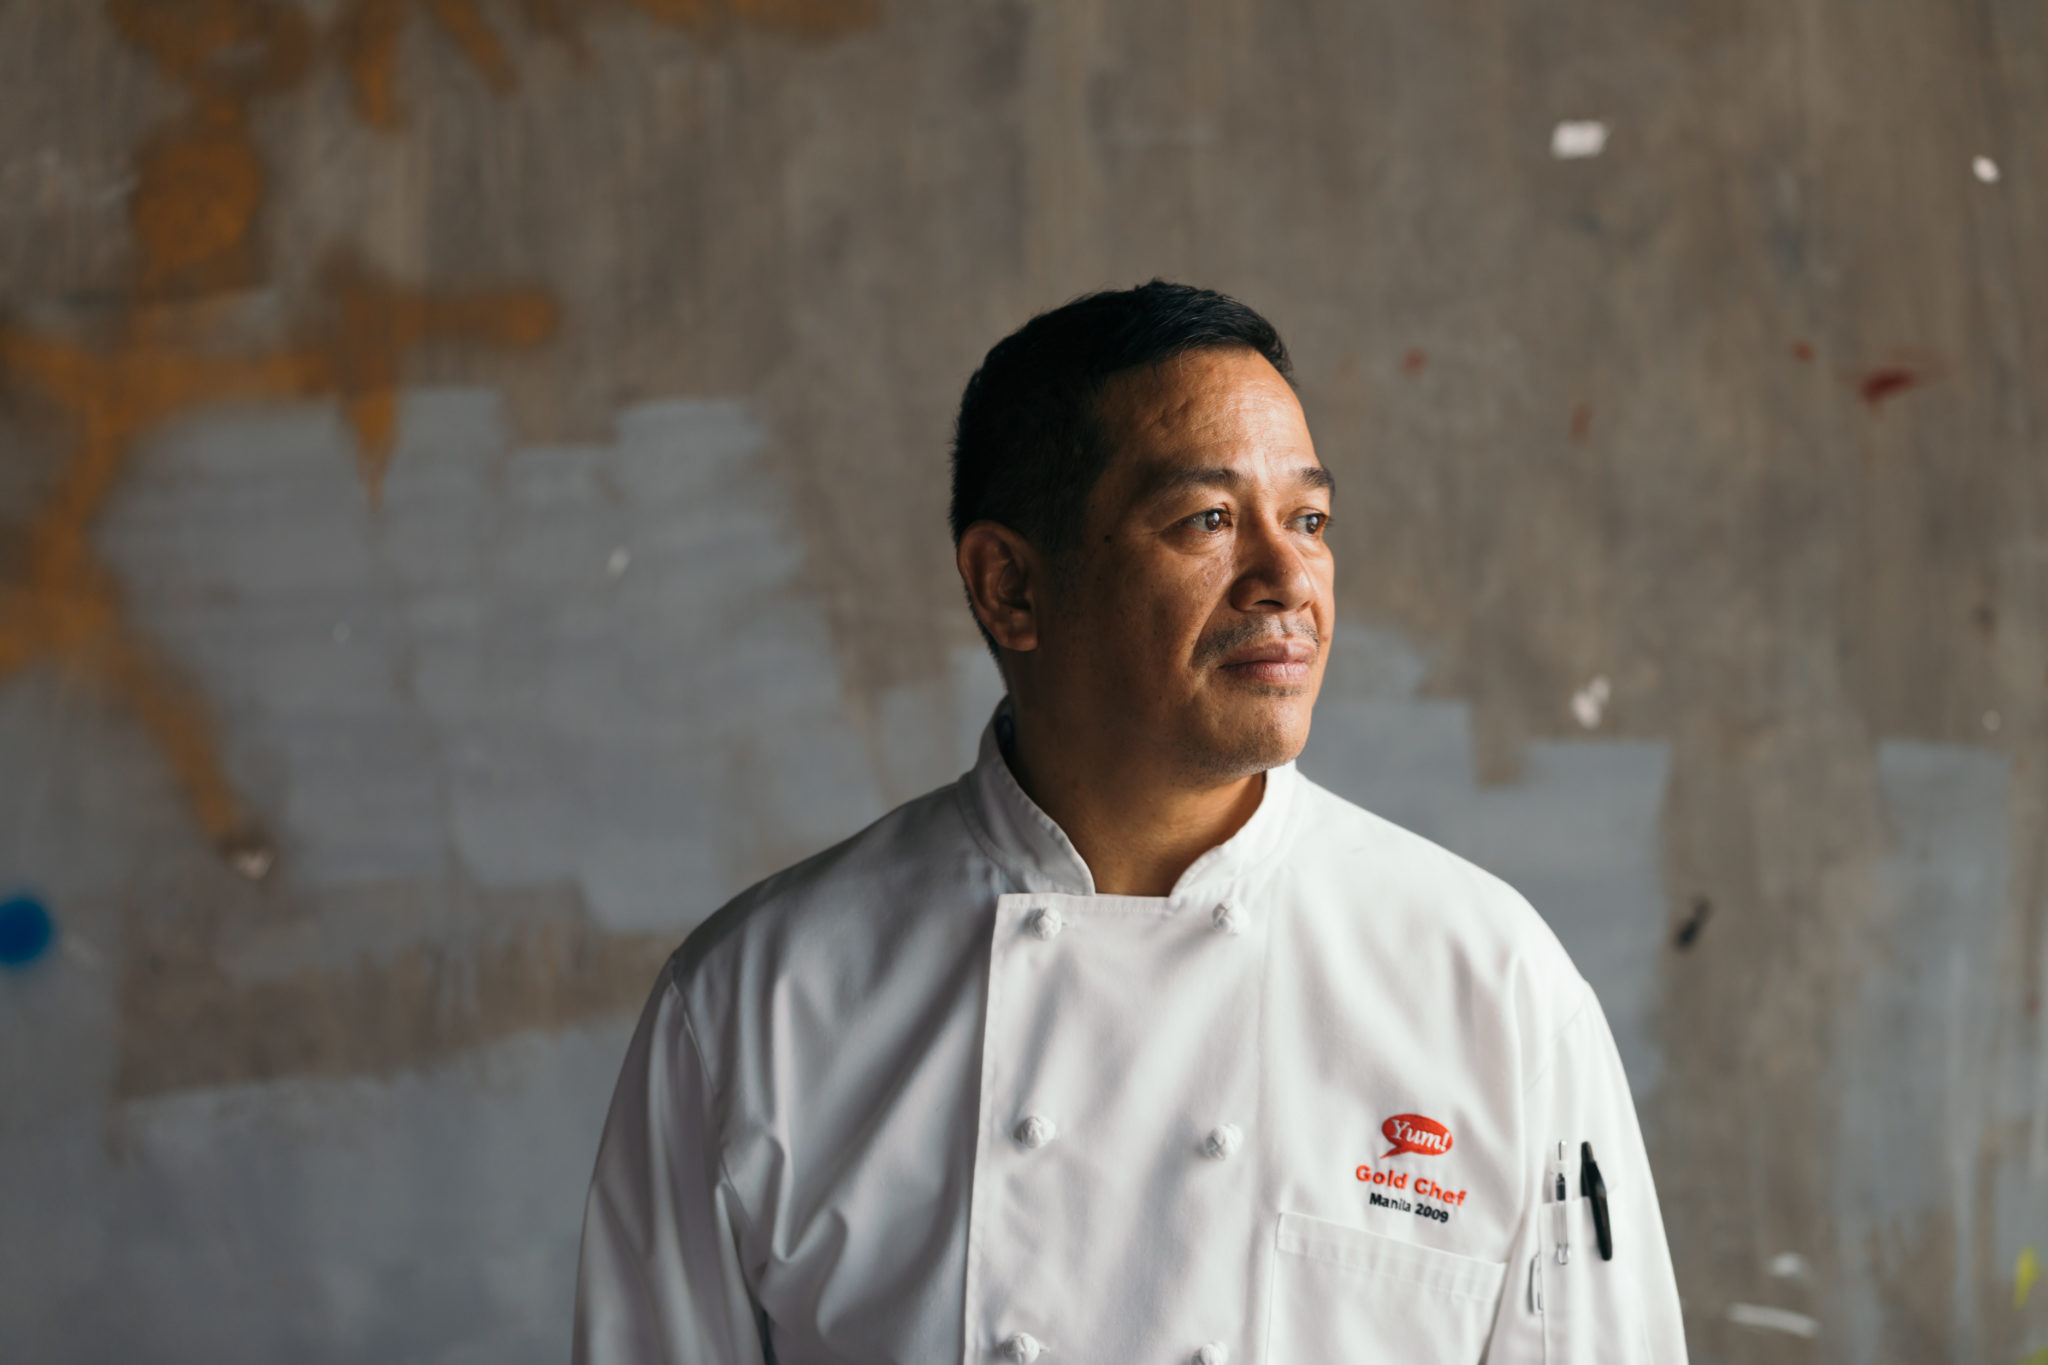 For Albert Ros, a love for food and the kitchen came naturally